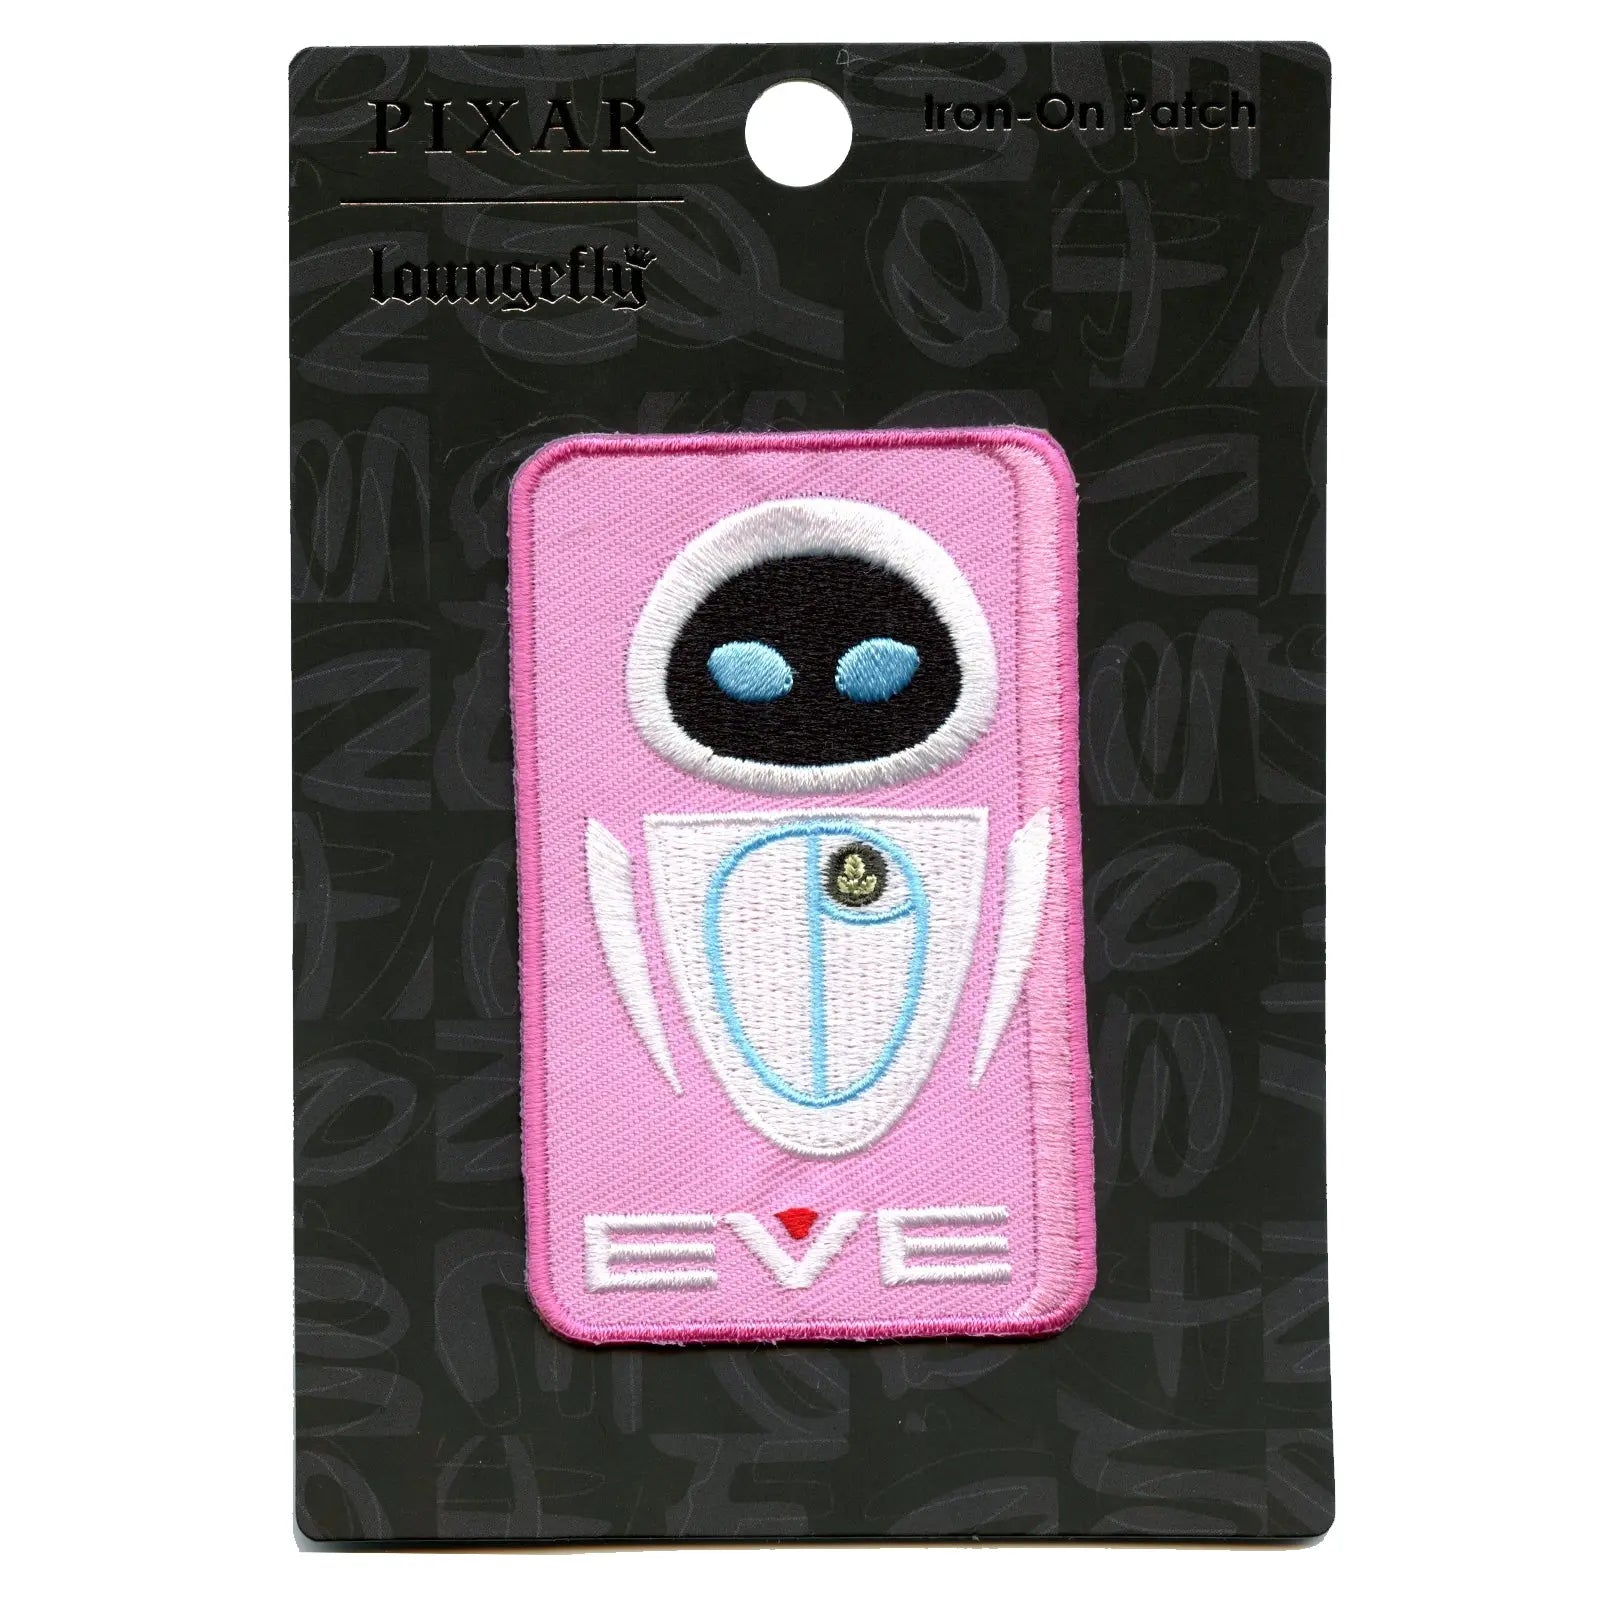 Official Wall-E "EVE" Full Body Embroidered Iron On Patch 